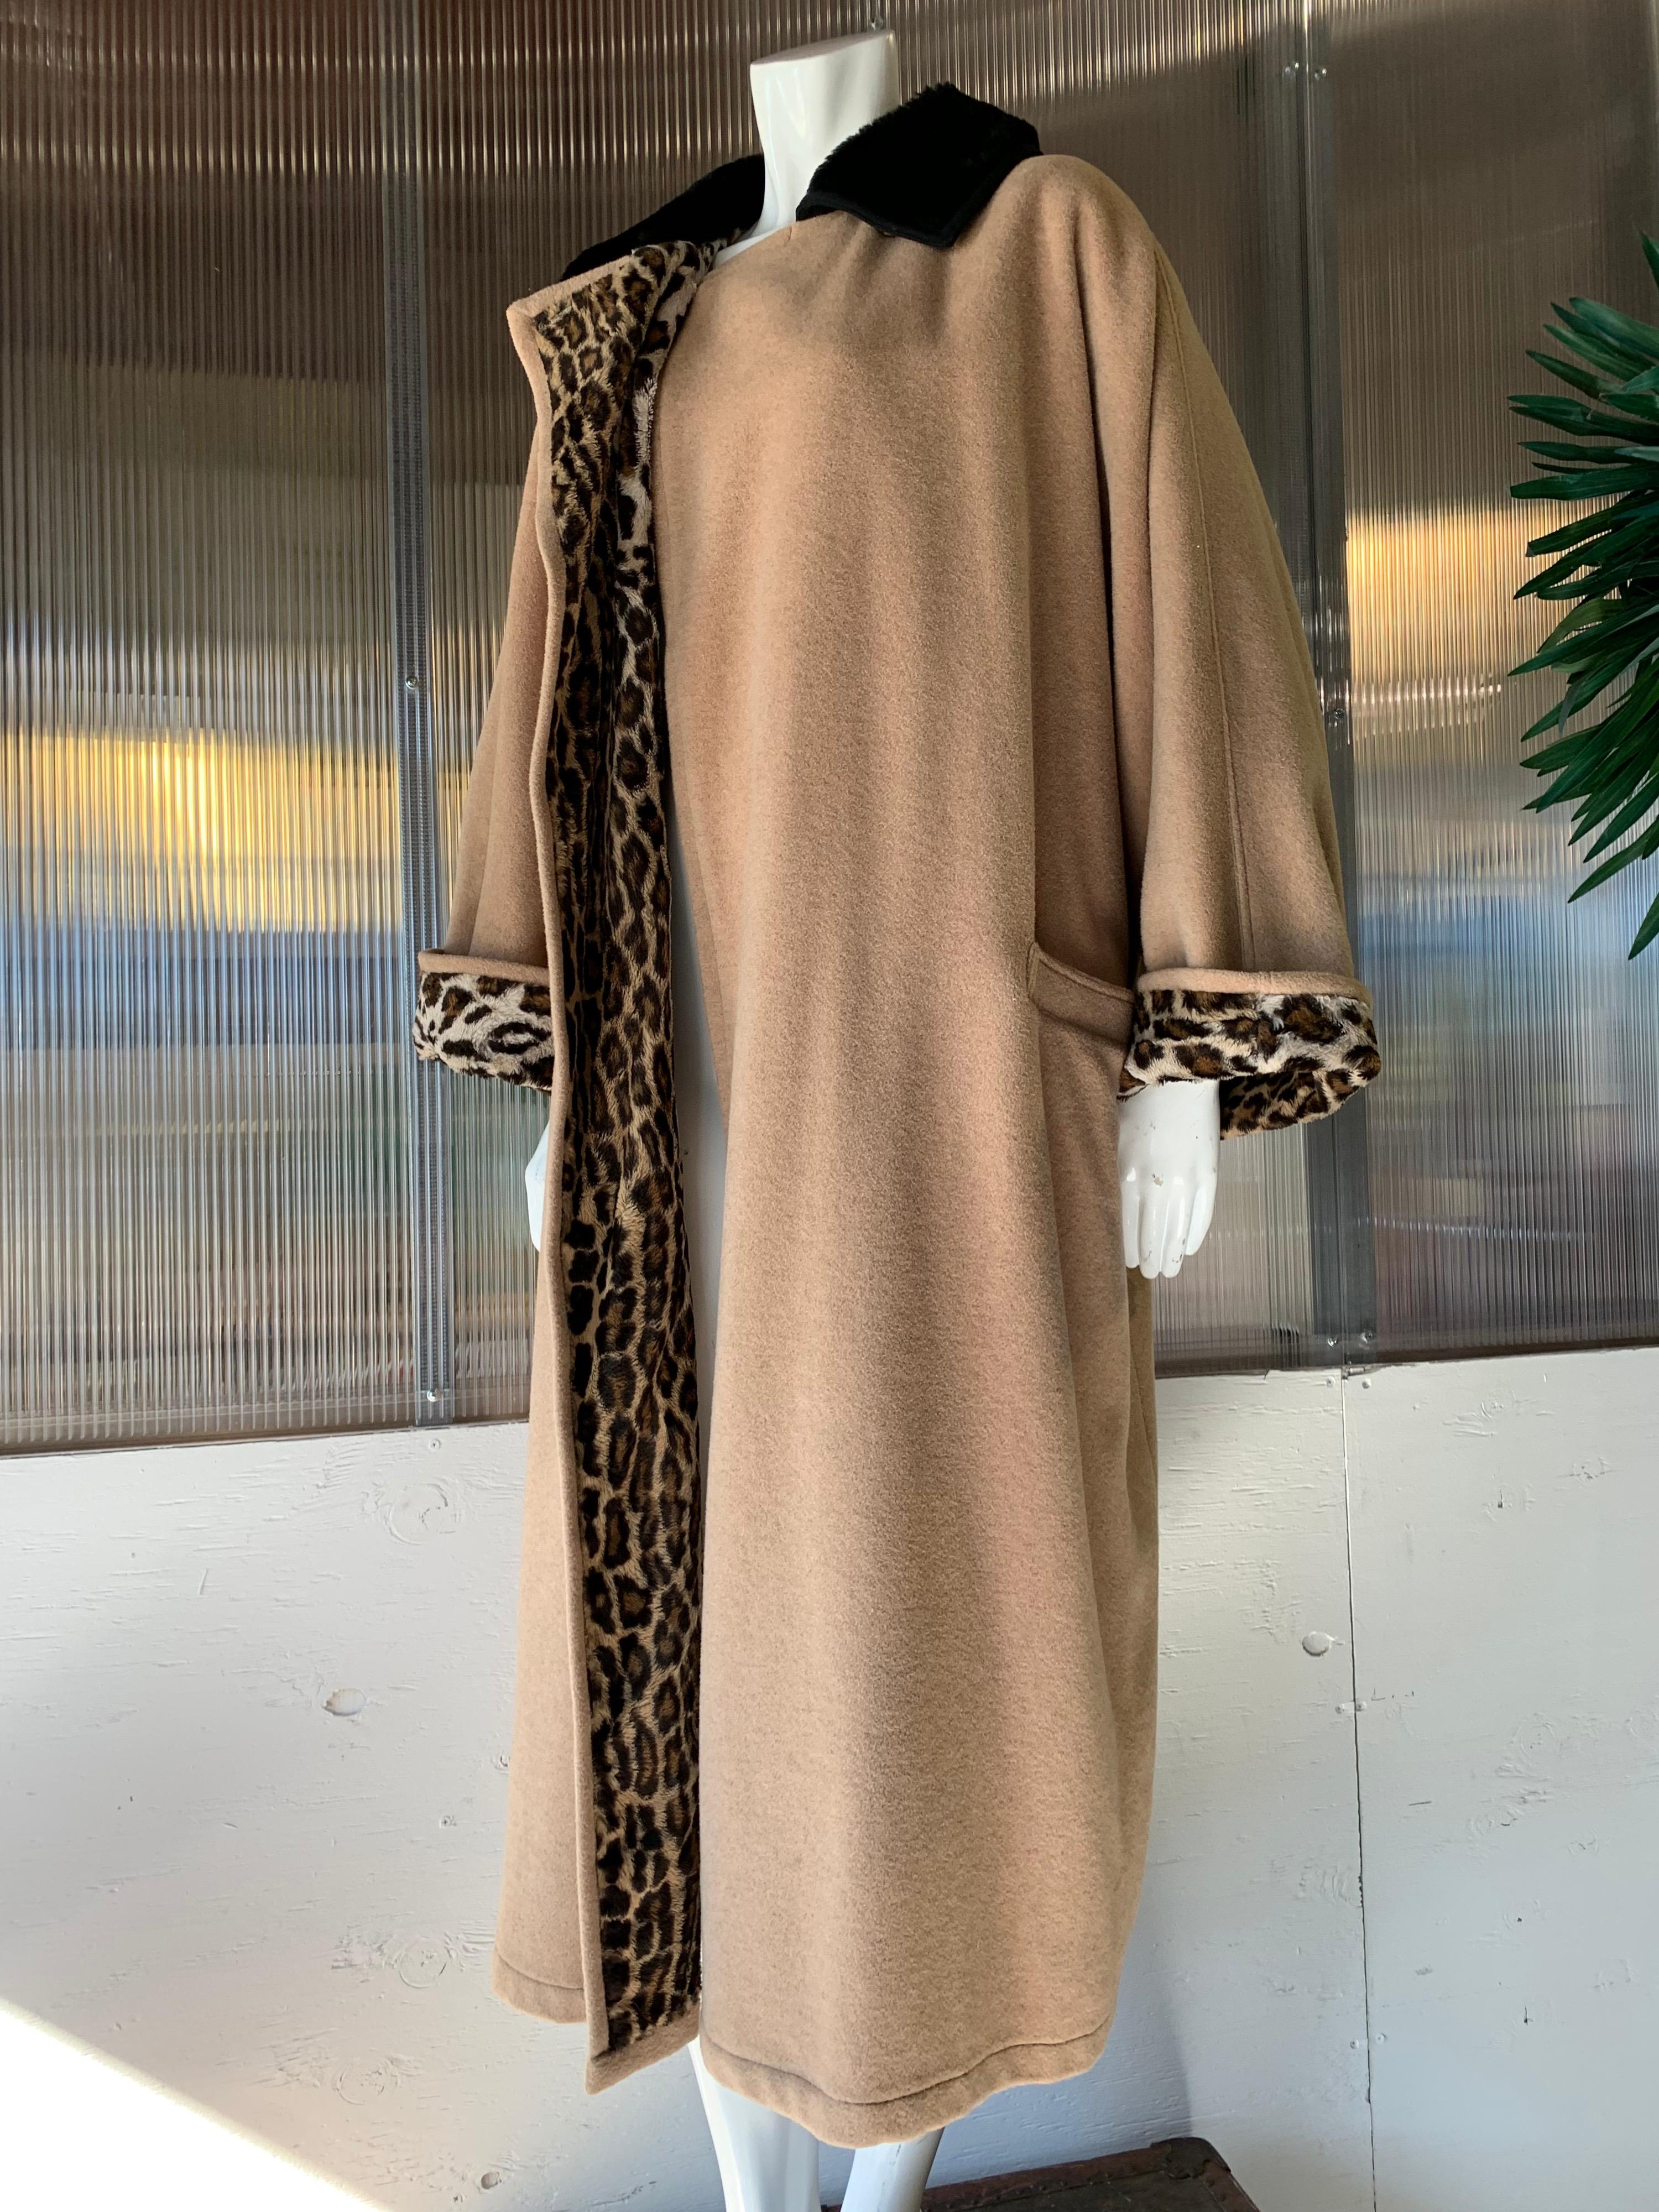 1980s Gianni Versace Camel Color Wool & Cashmere Overcoat W/ Faux Leopard Lining. Sculpted fur collar, brass buttons at collar.  Full, boxy, overcoat-style cut.